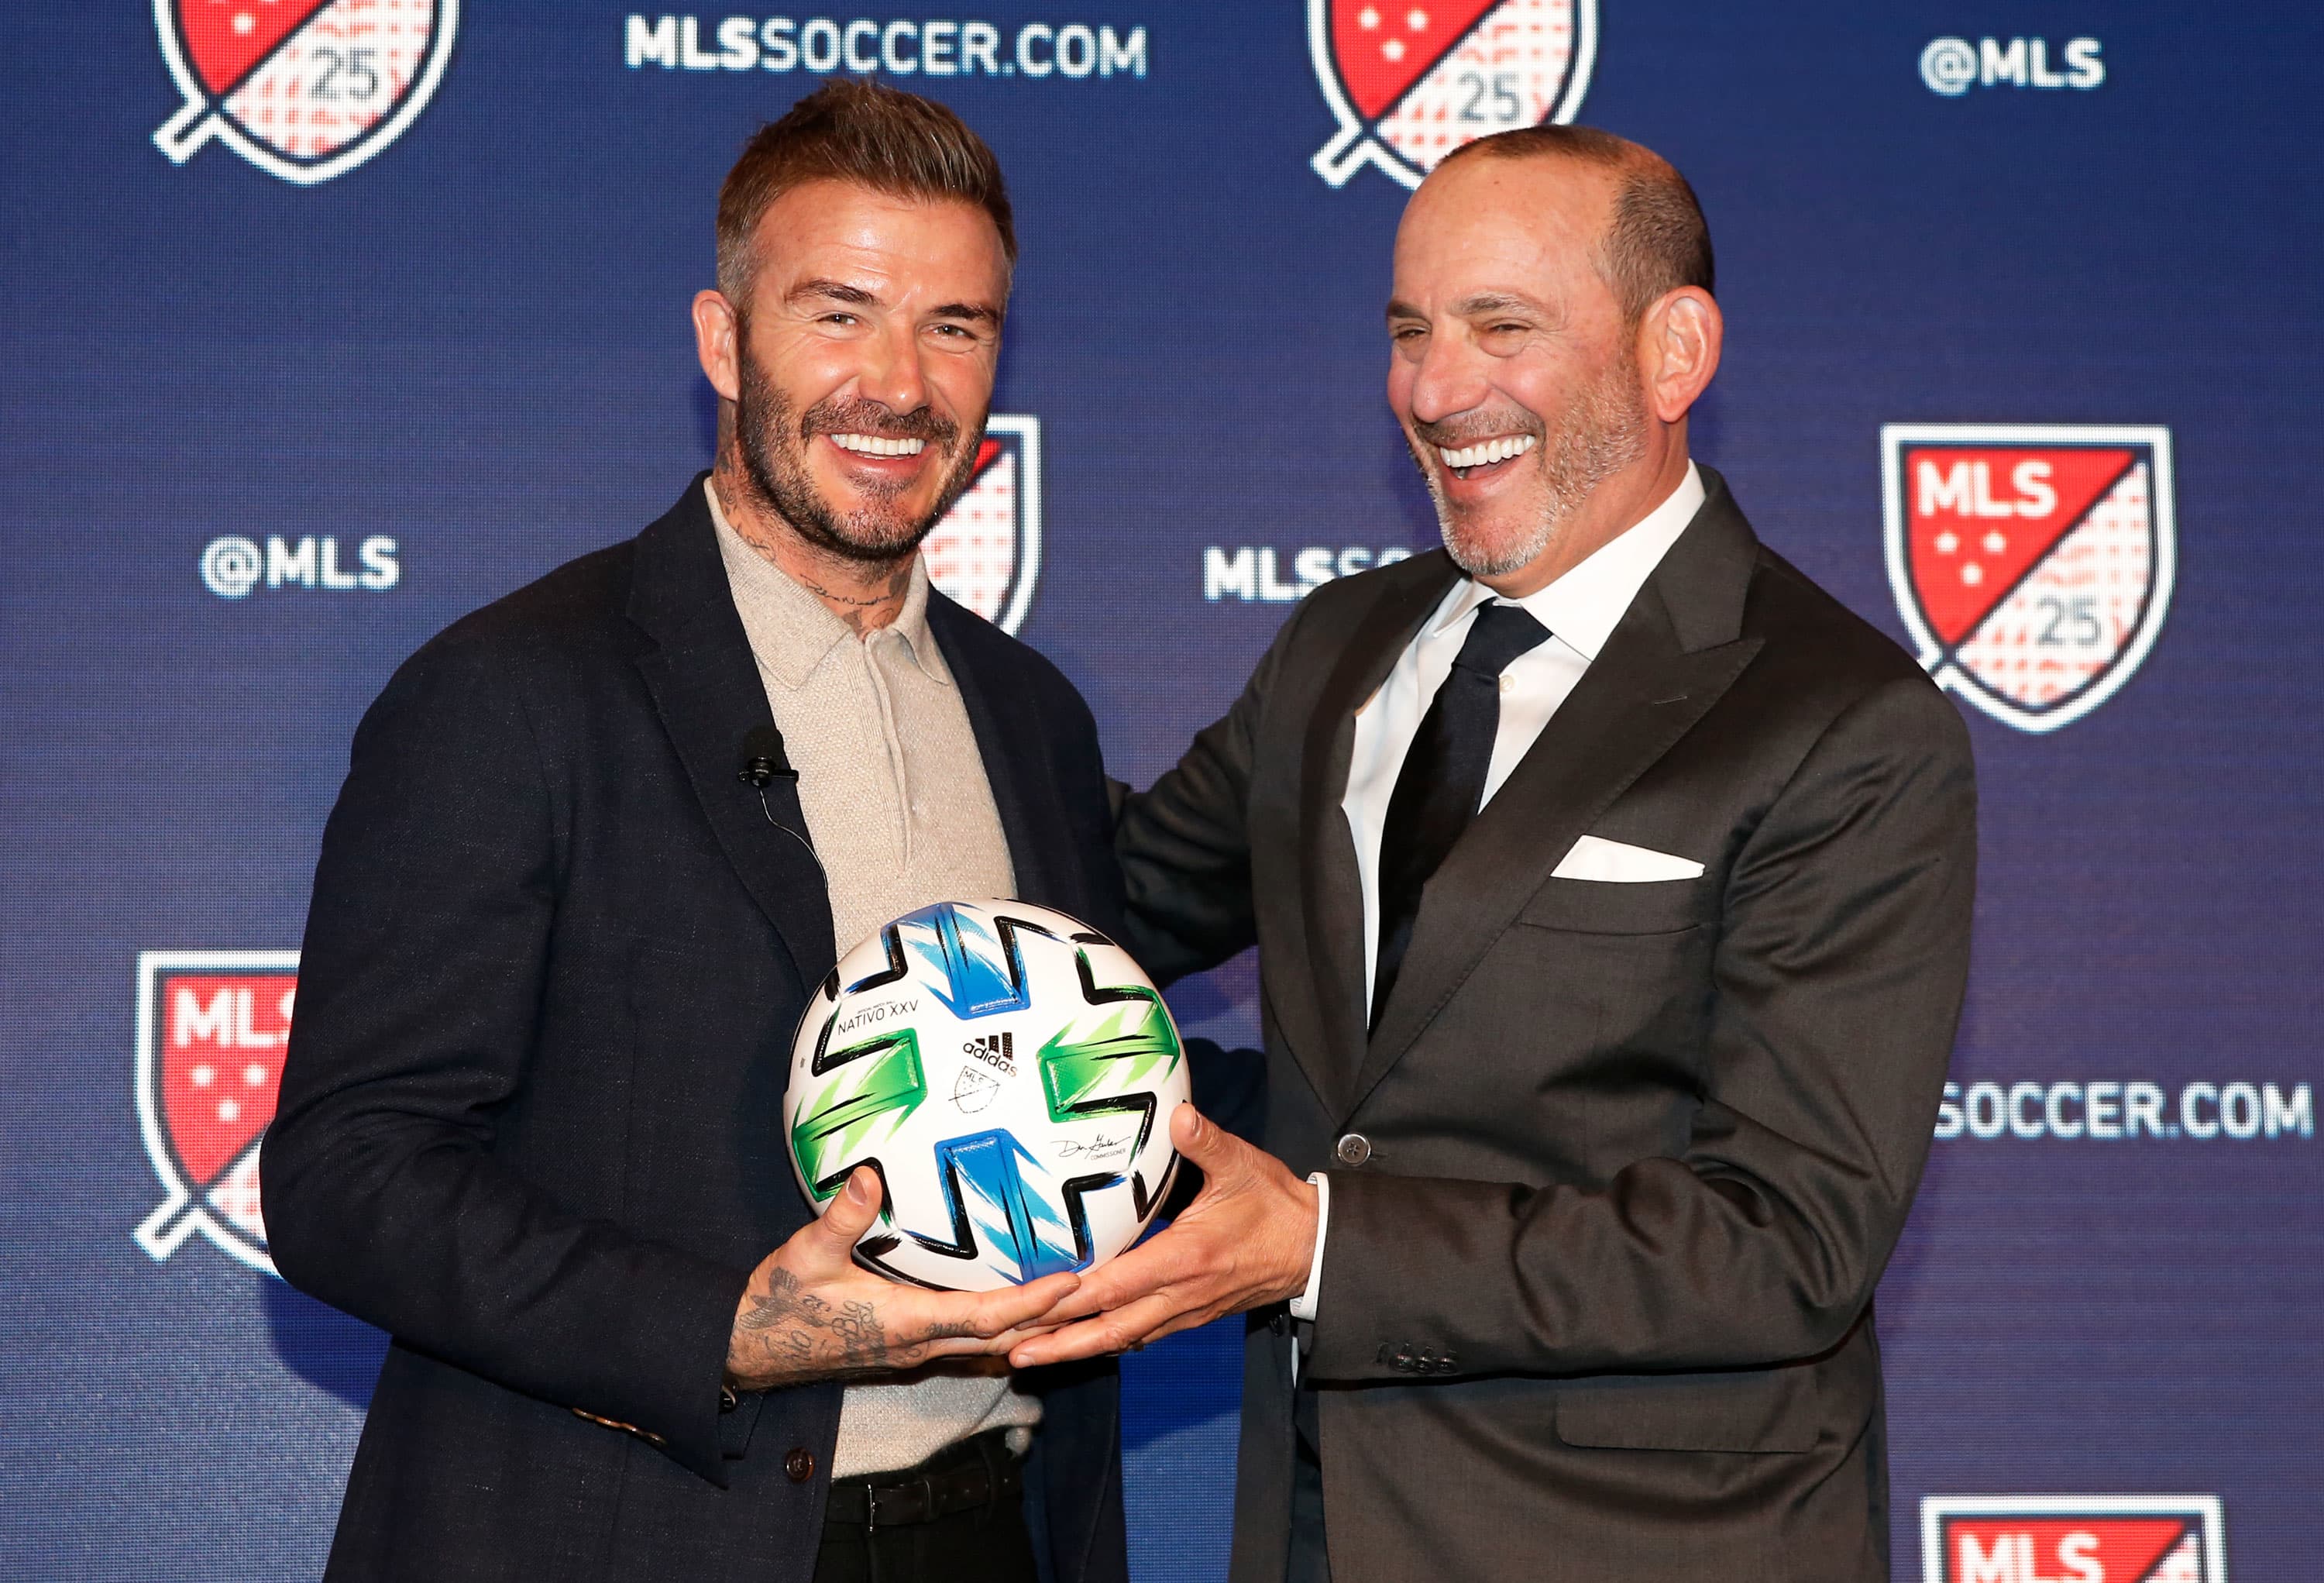 Major League Soccer has a 25-year plan, but it needs to secure